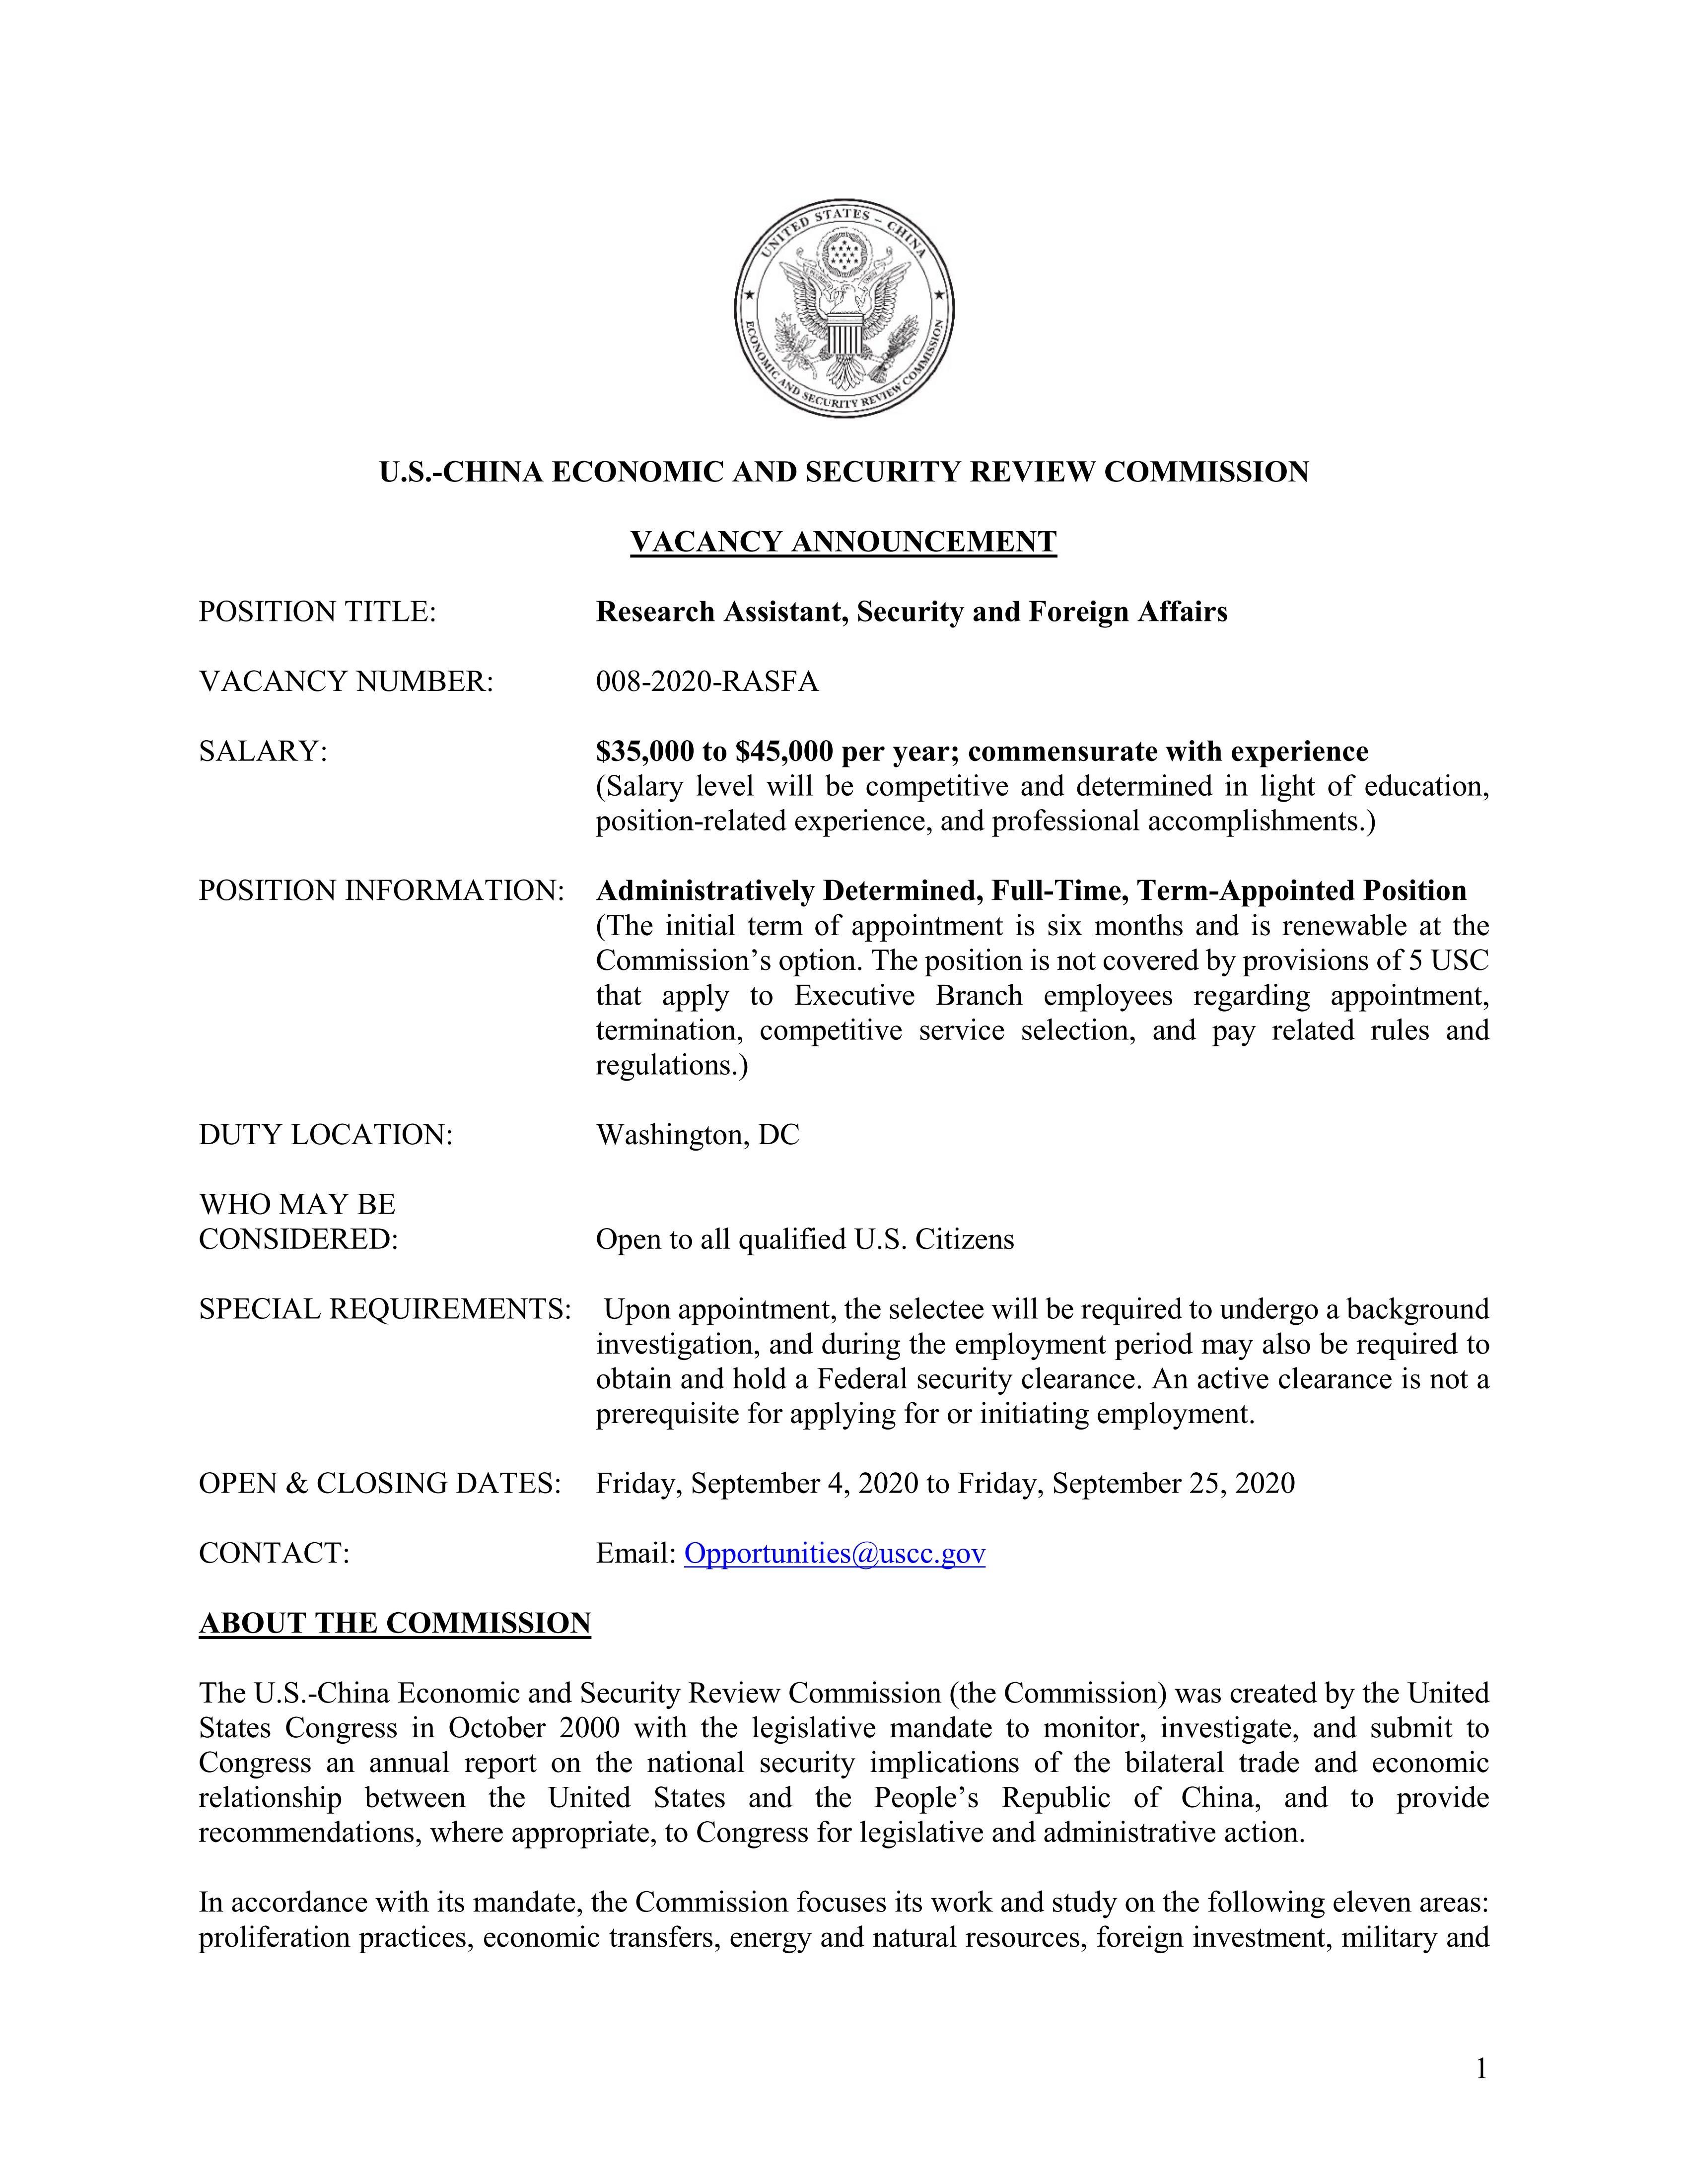 Job Opportunity with the US-China Economic & Security Review Commission